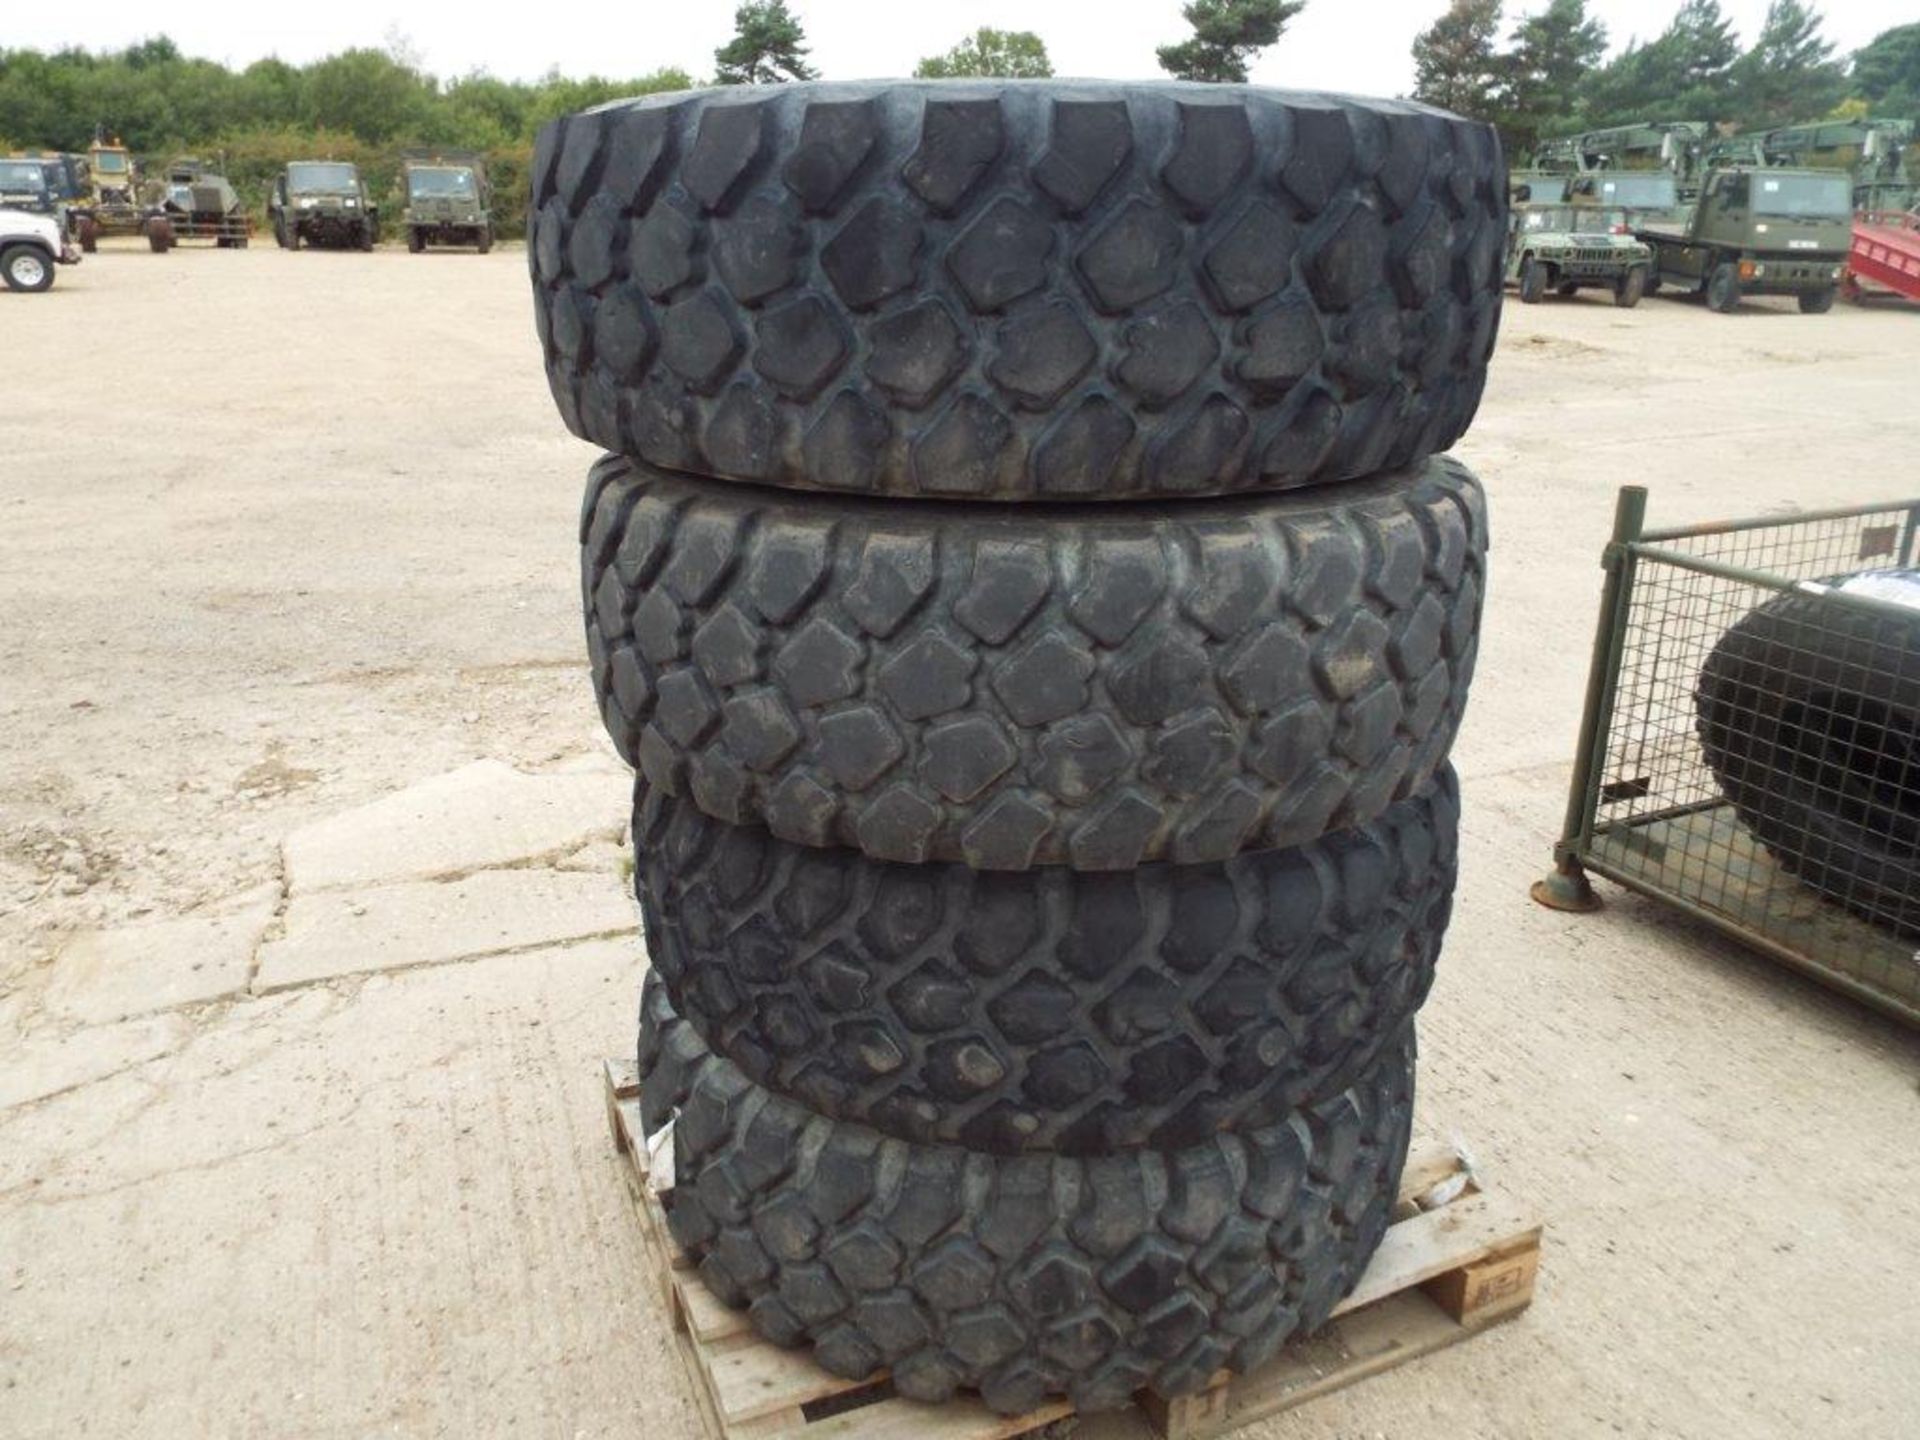 4 x Michelin XZL 395/85 R20 Tyres with 10 Stud Rims